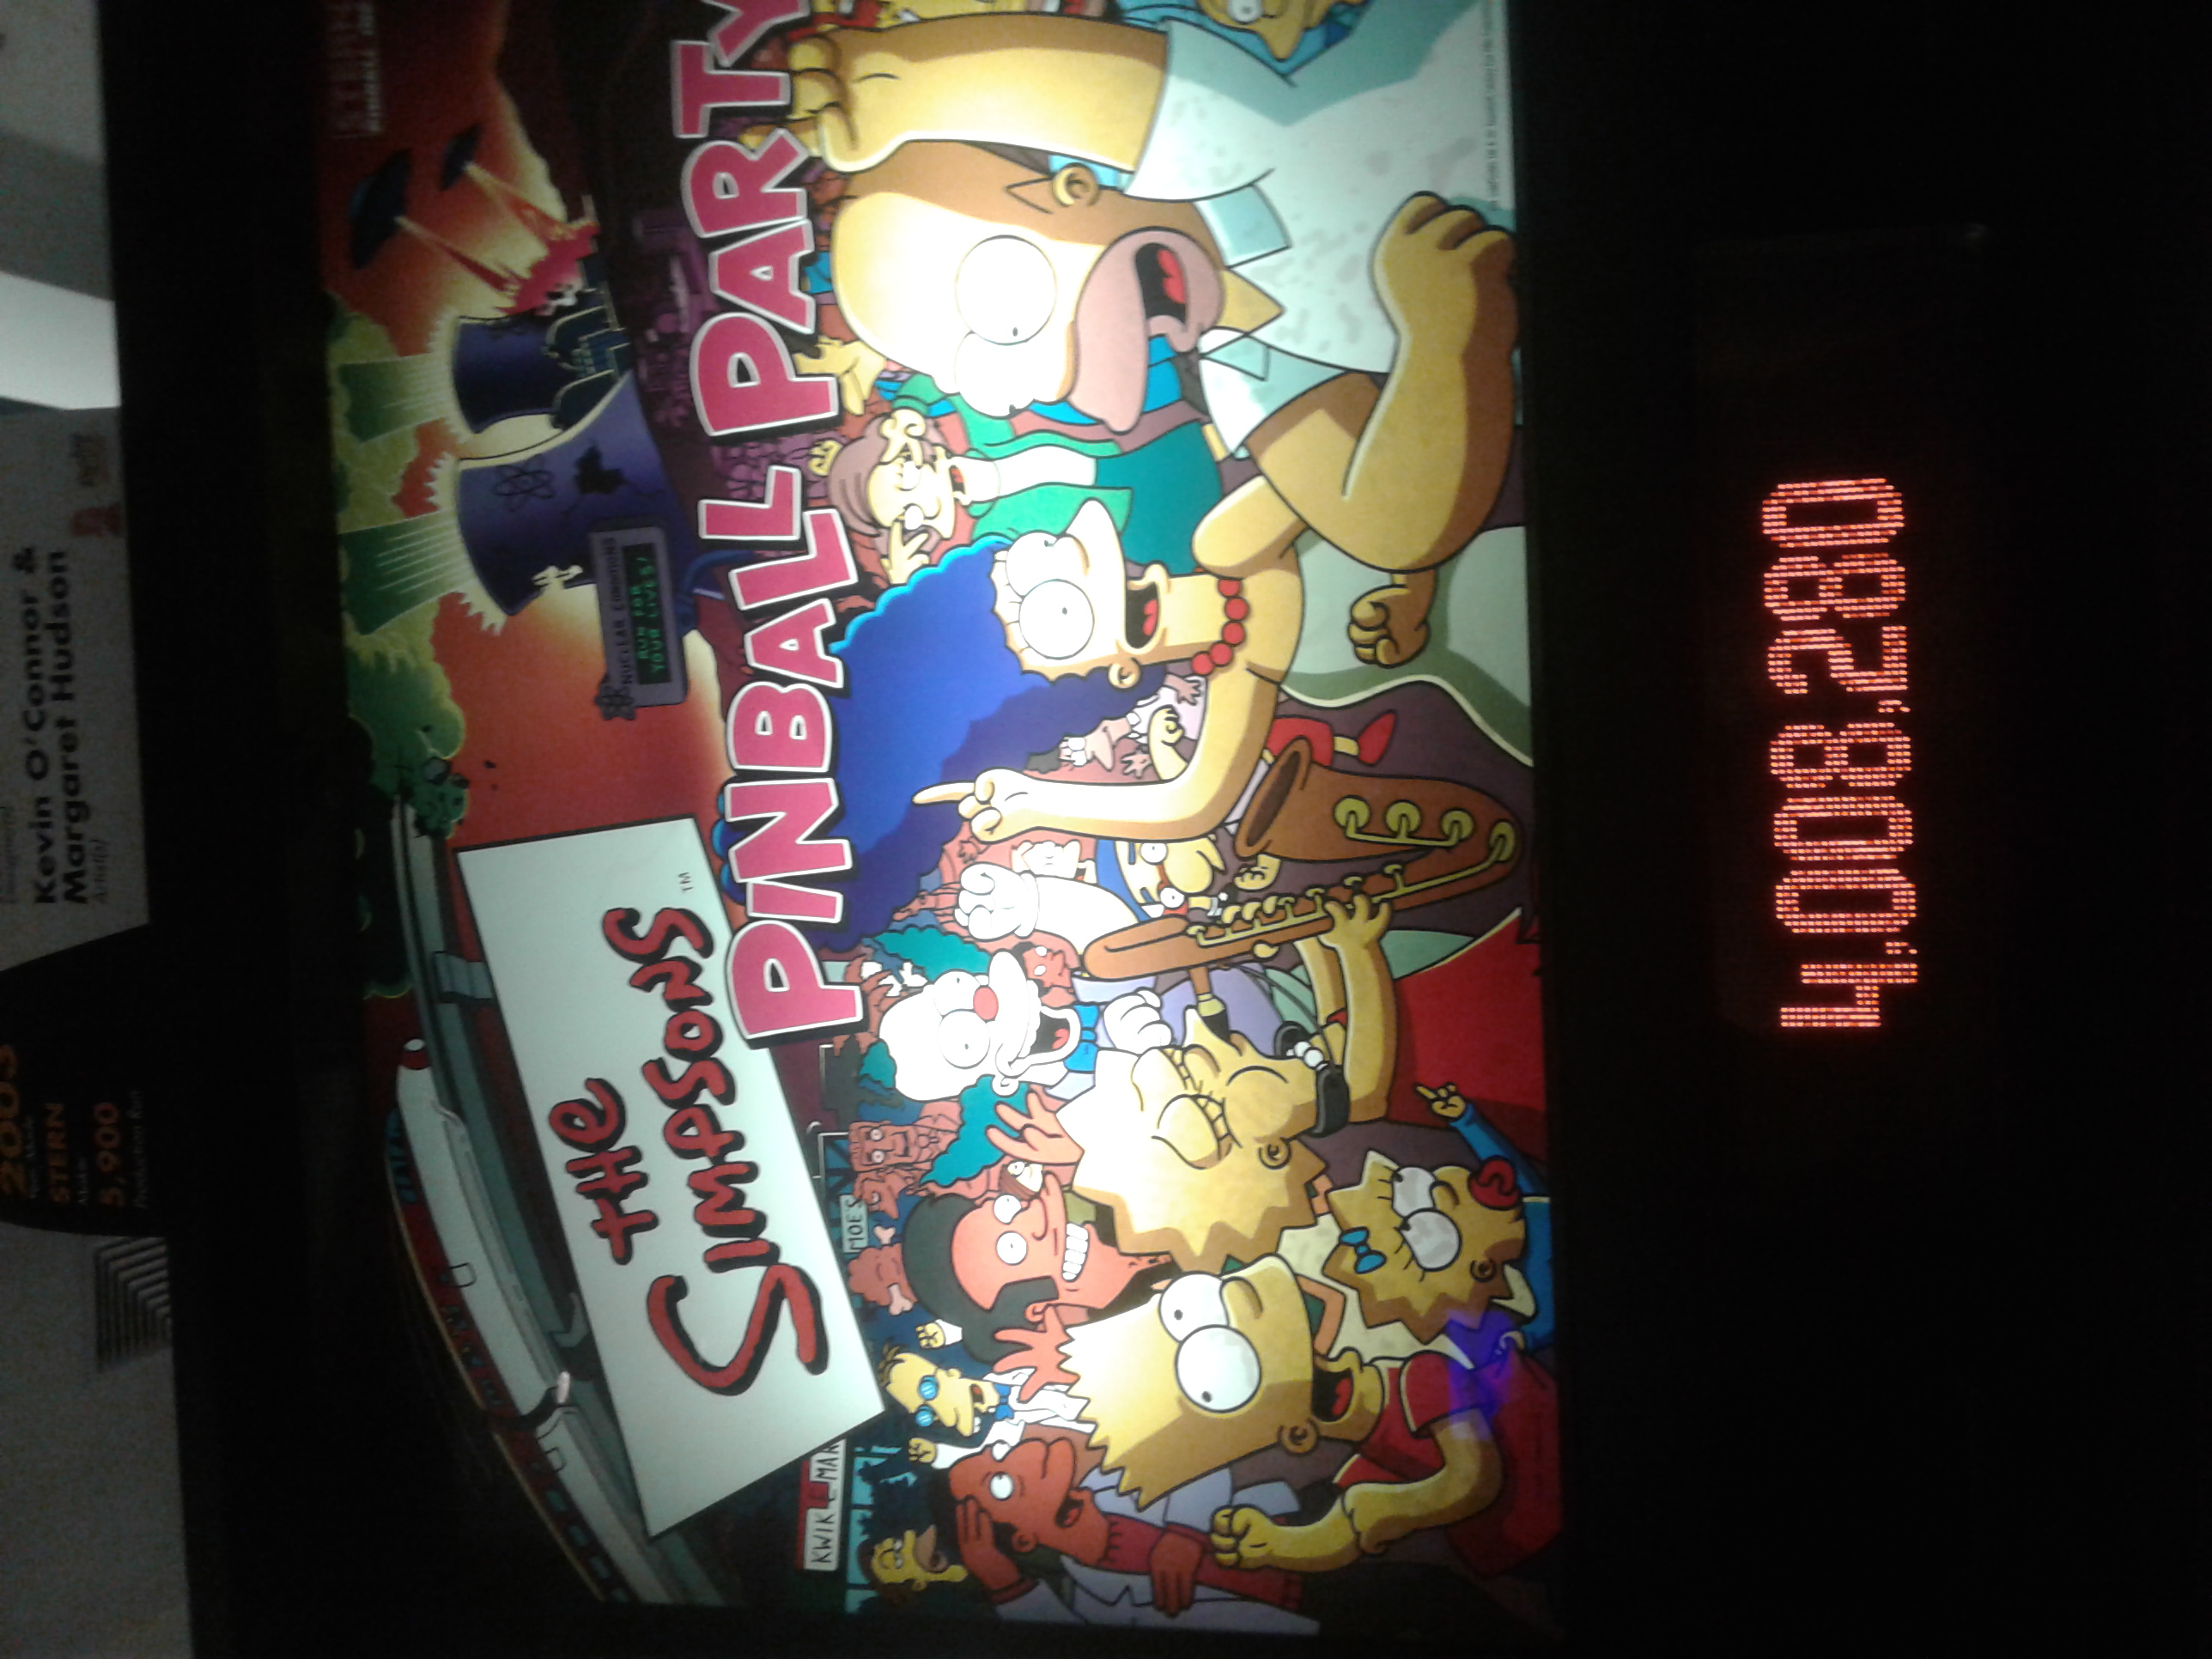 Mark: The Simpsons Pinball Party (Pinball: 5 Balls) 4,008,280 points on 2019-01-01 22:21:42